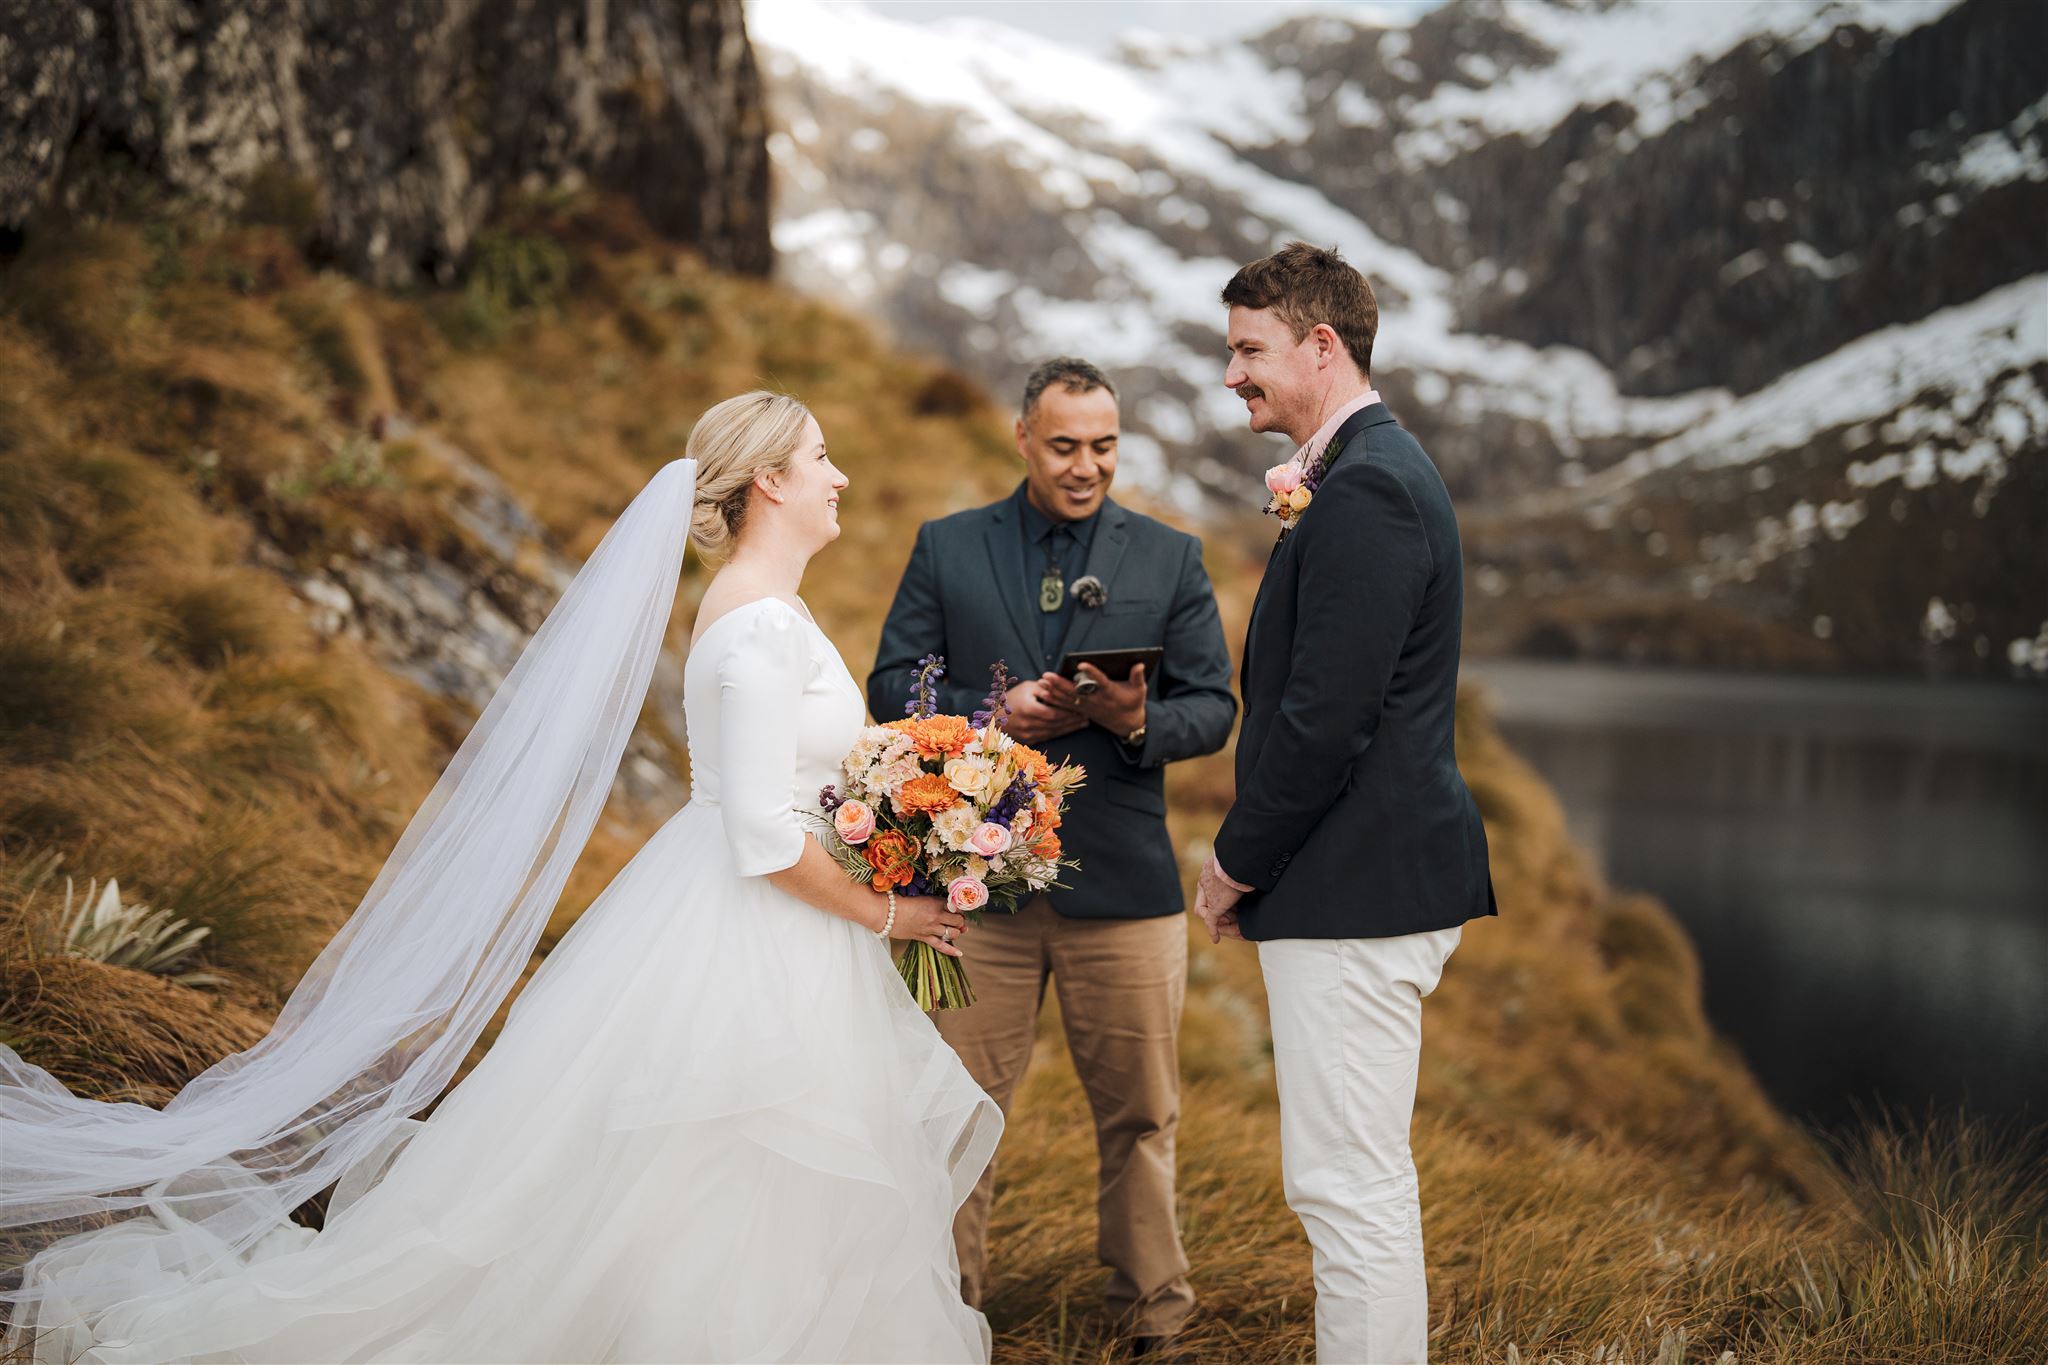 Queenstown wedding celebrant from Your Big Day